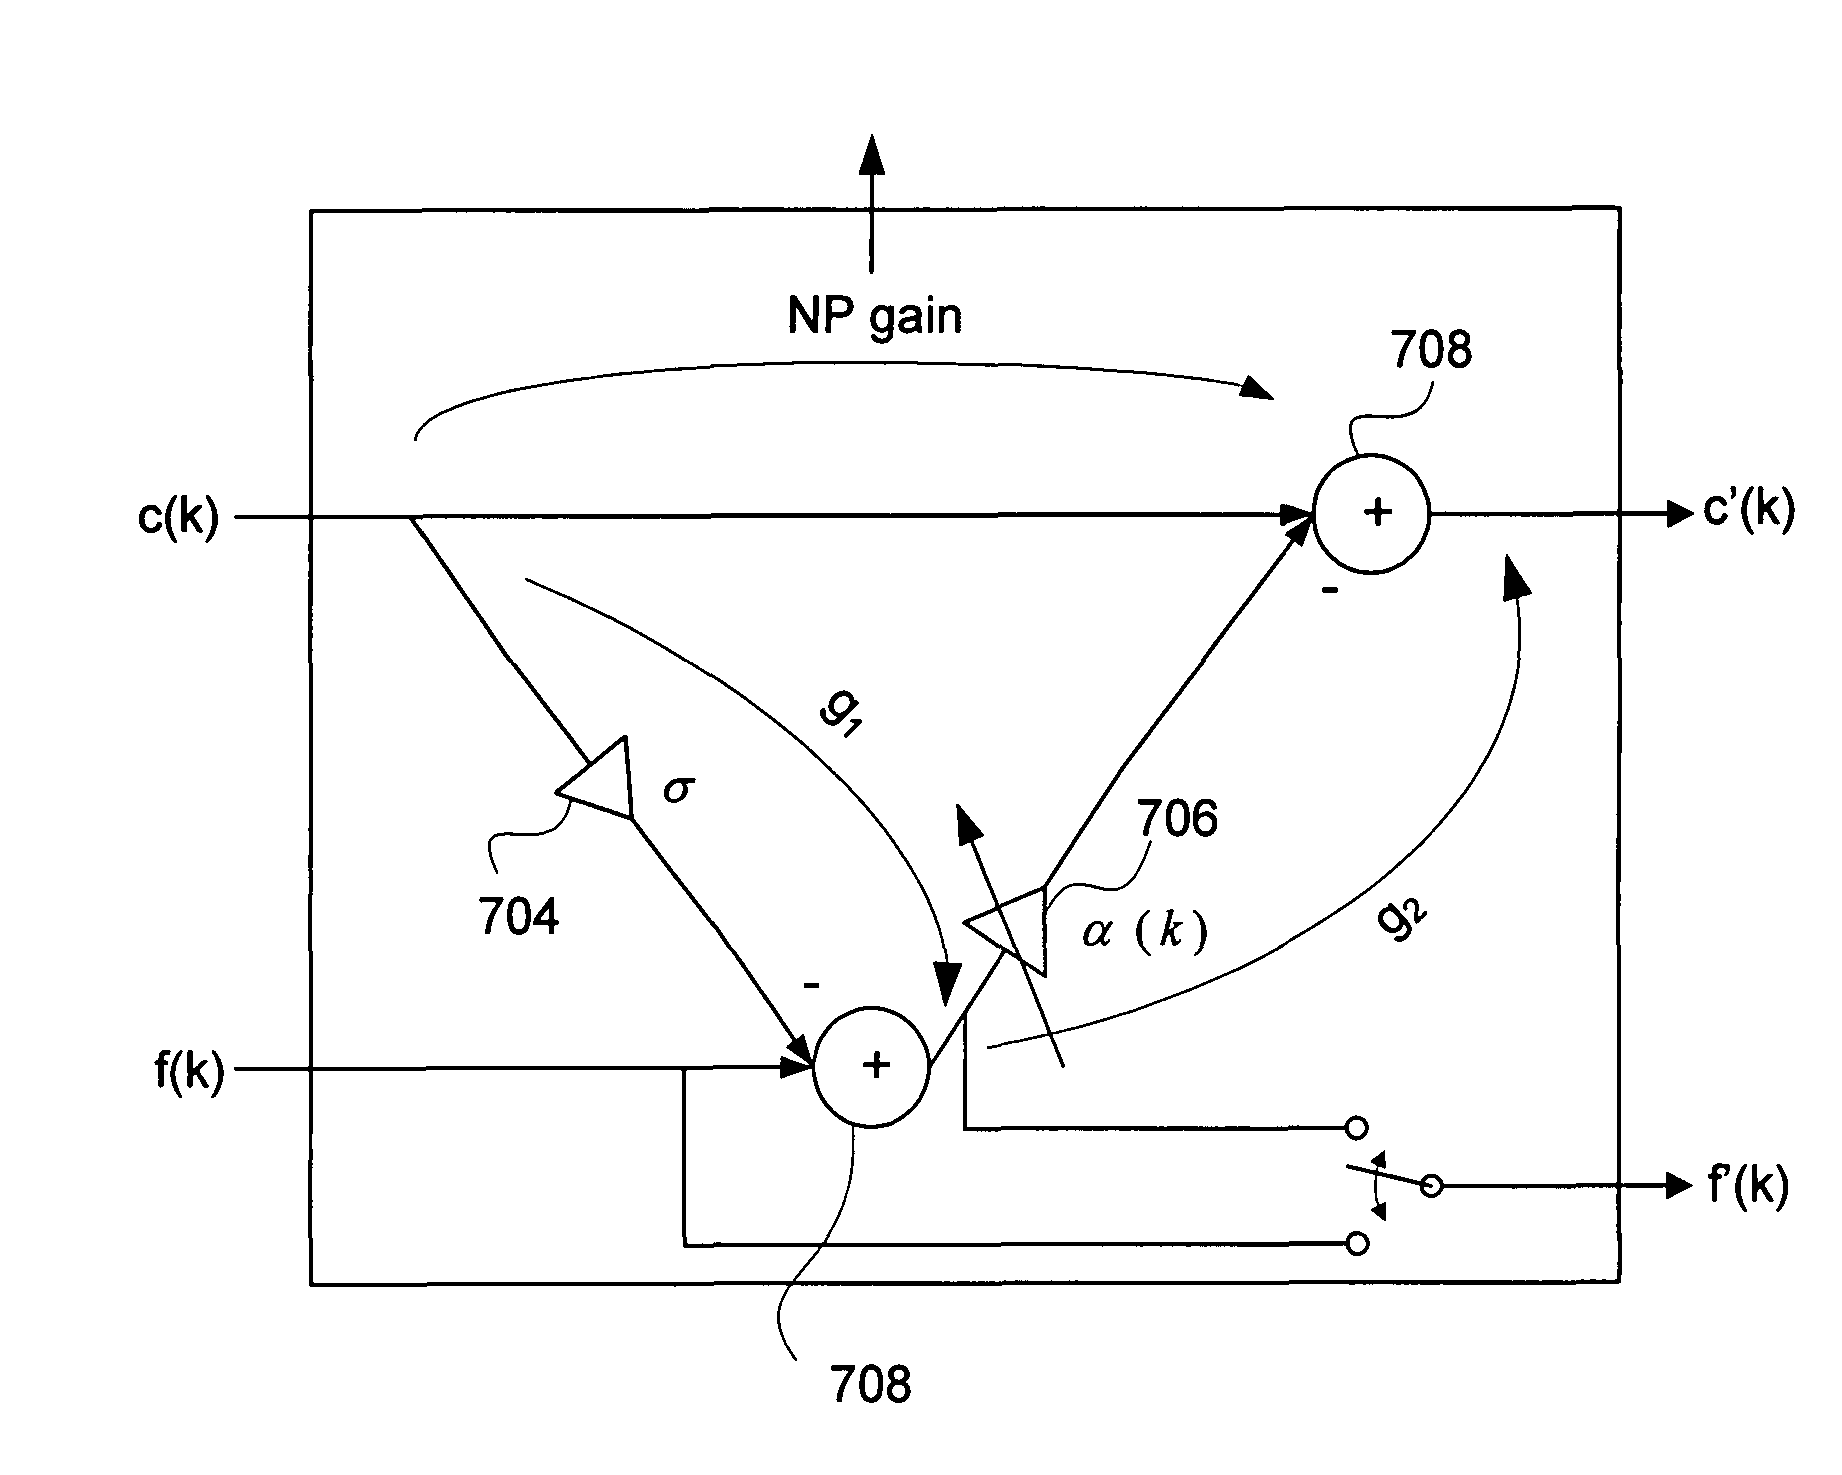 System and method for providing noise suppression utilizing null processing noise subtraction